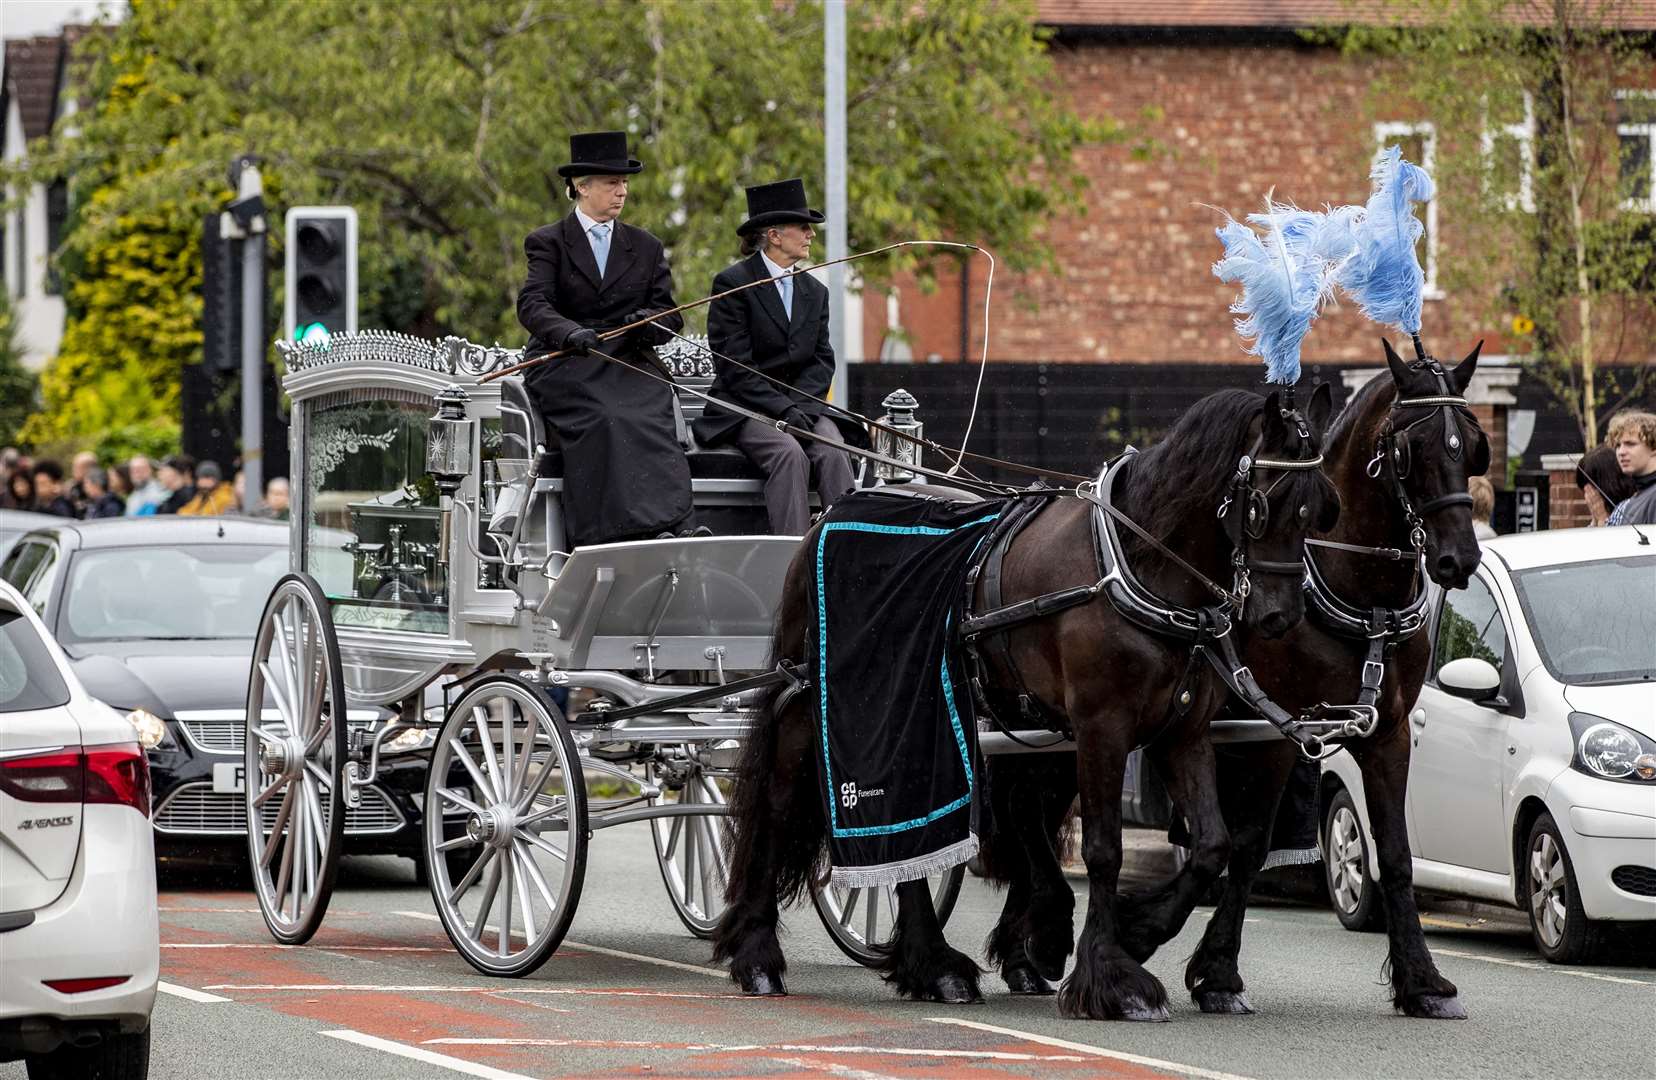 The coffin was carried in a silver carriage pulled by two horses (Peter Byrne/PA)